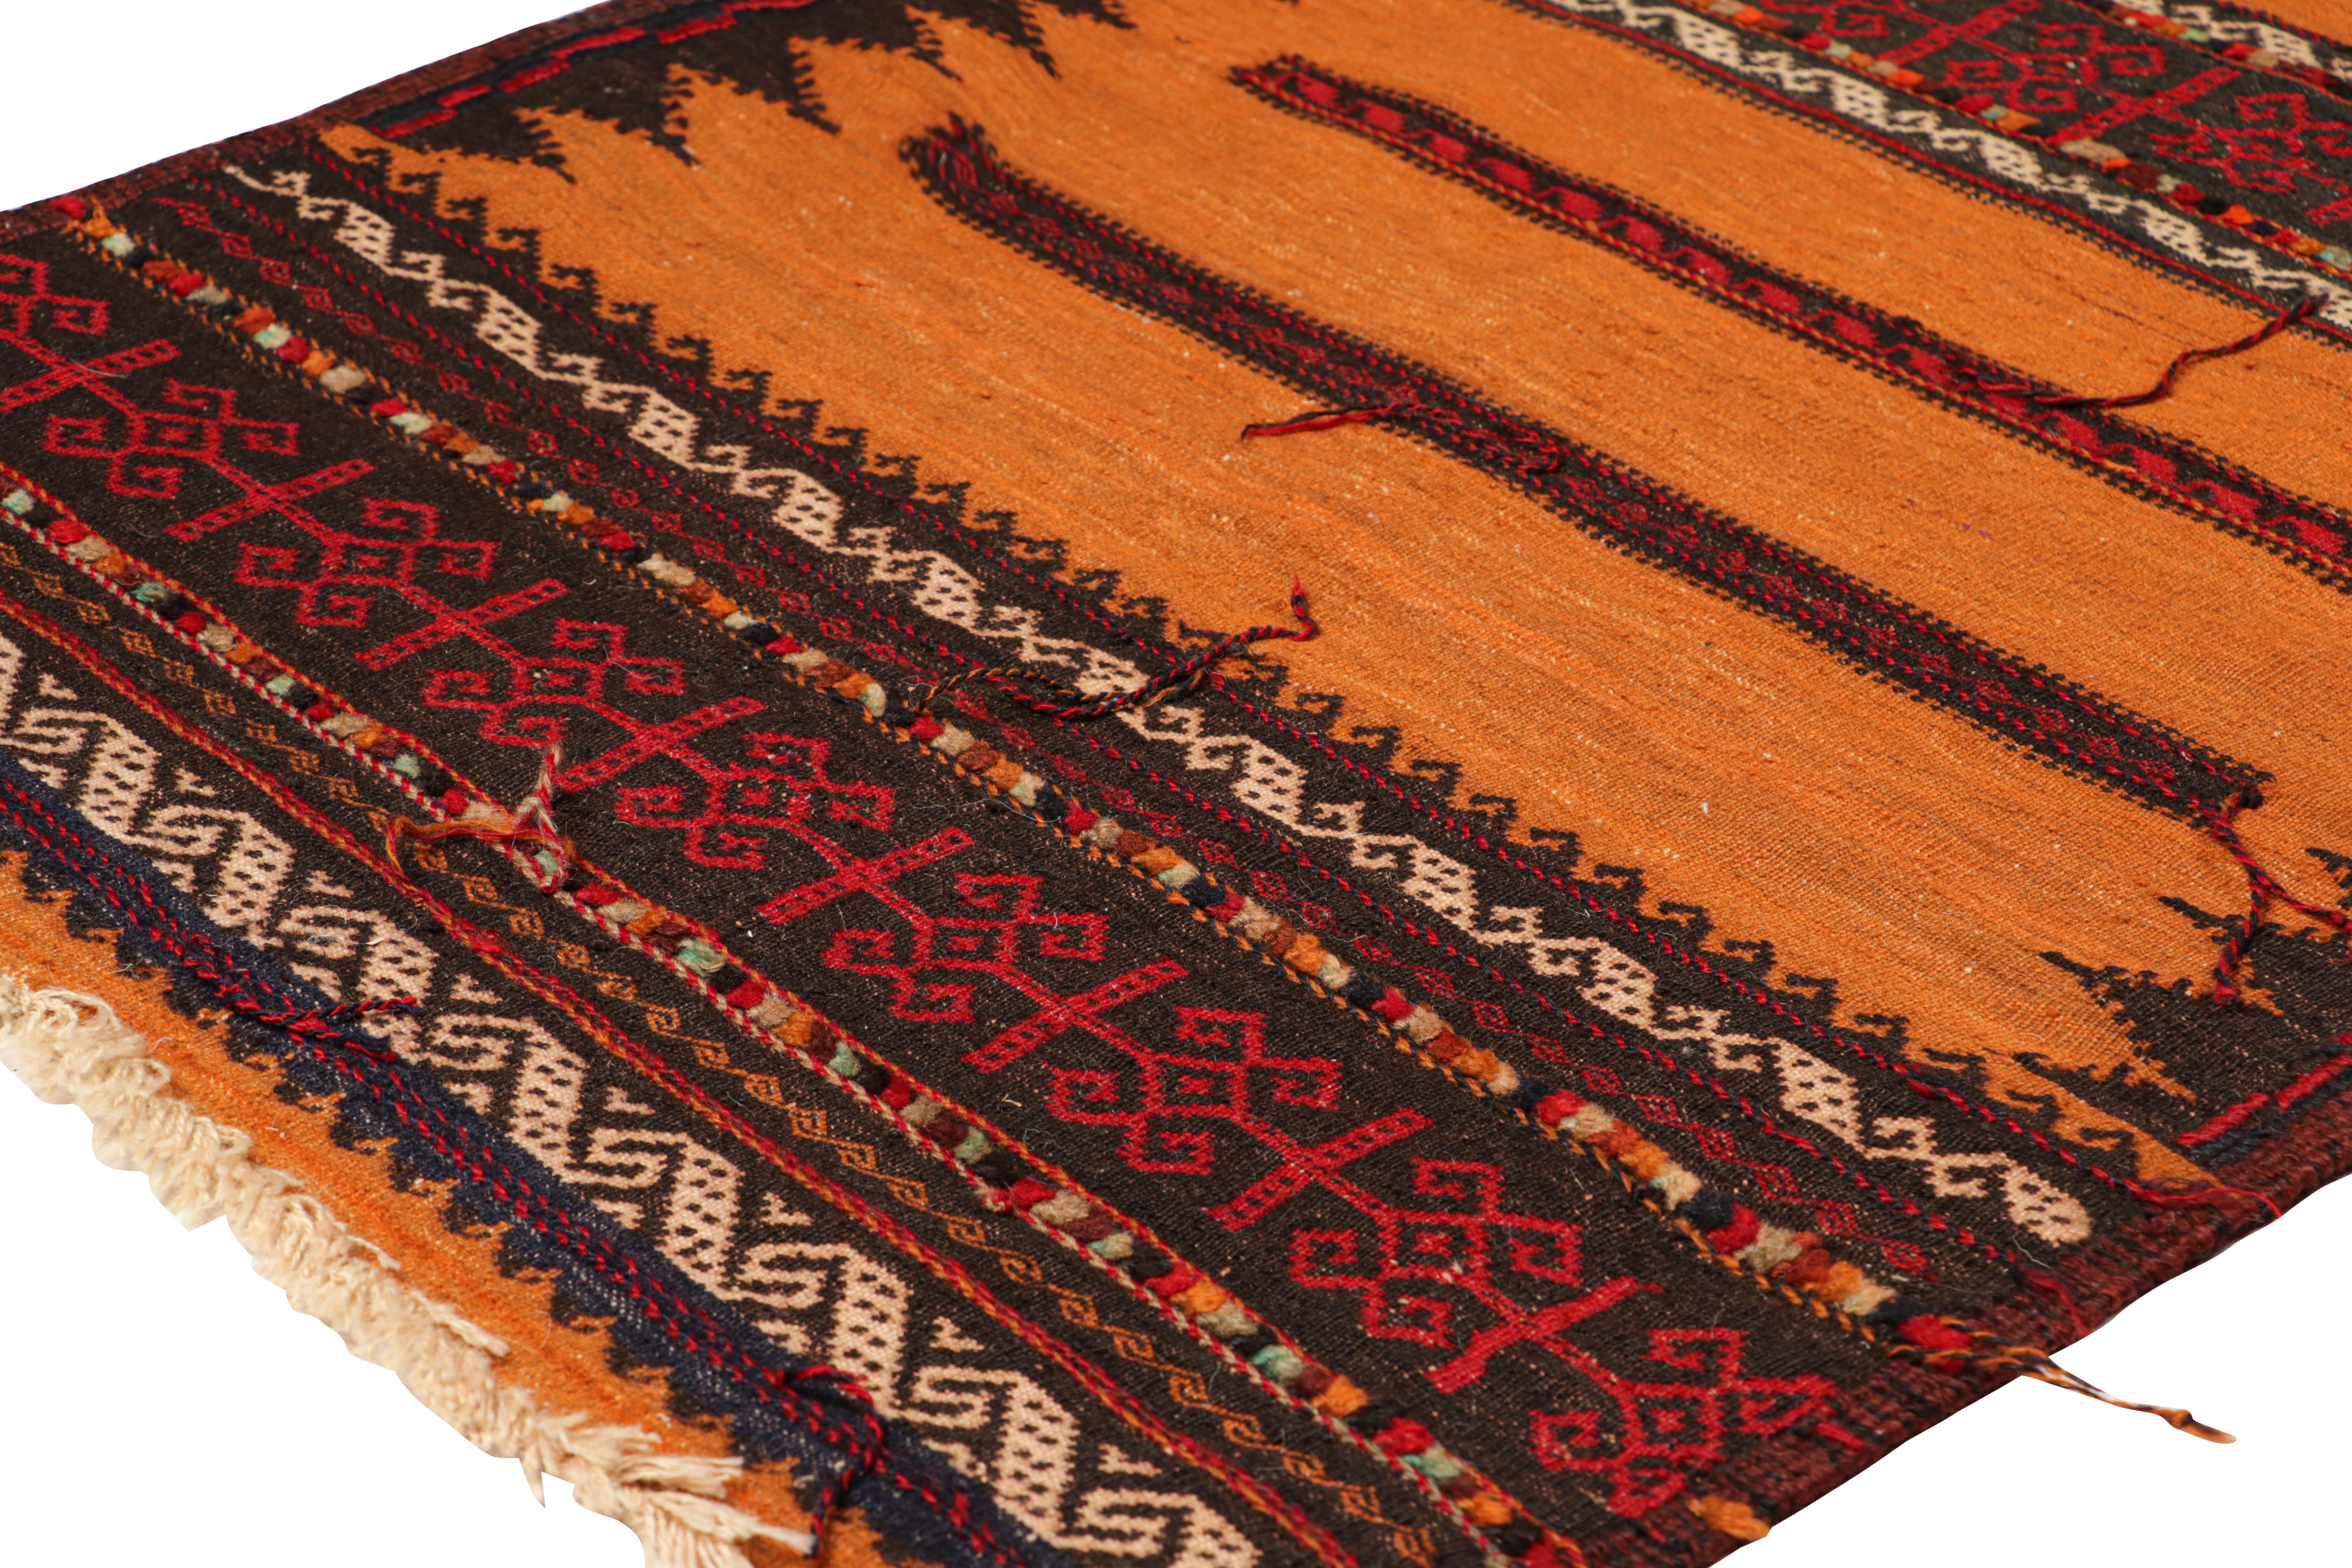 Hand-Woven Vintage Afghan Kilim in Rust, with Polychromatic Patterns, from Rug & Kilim For Sale